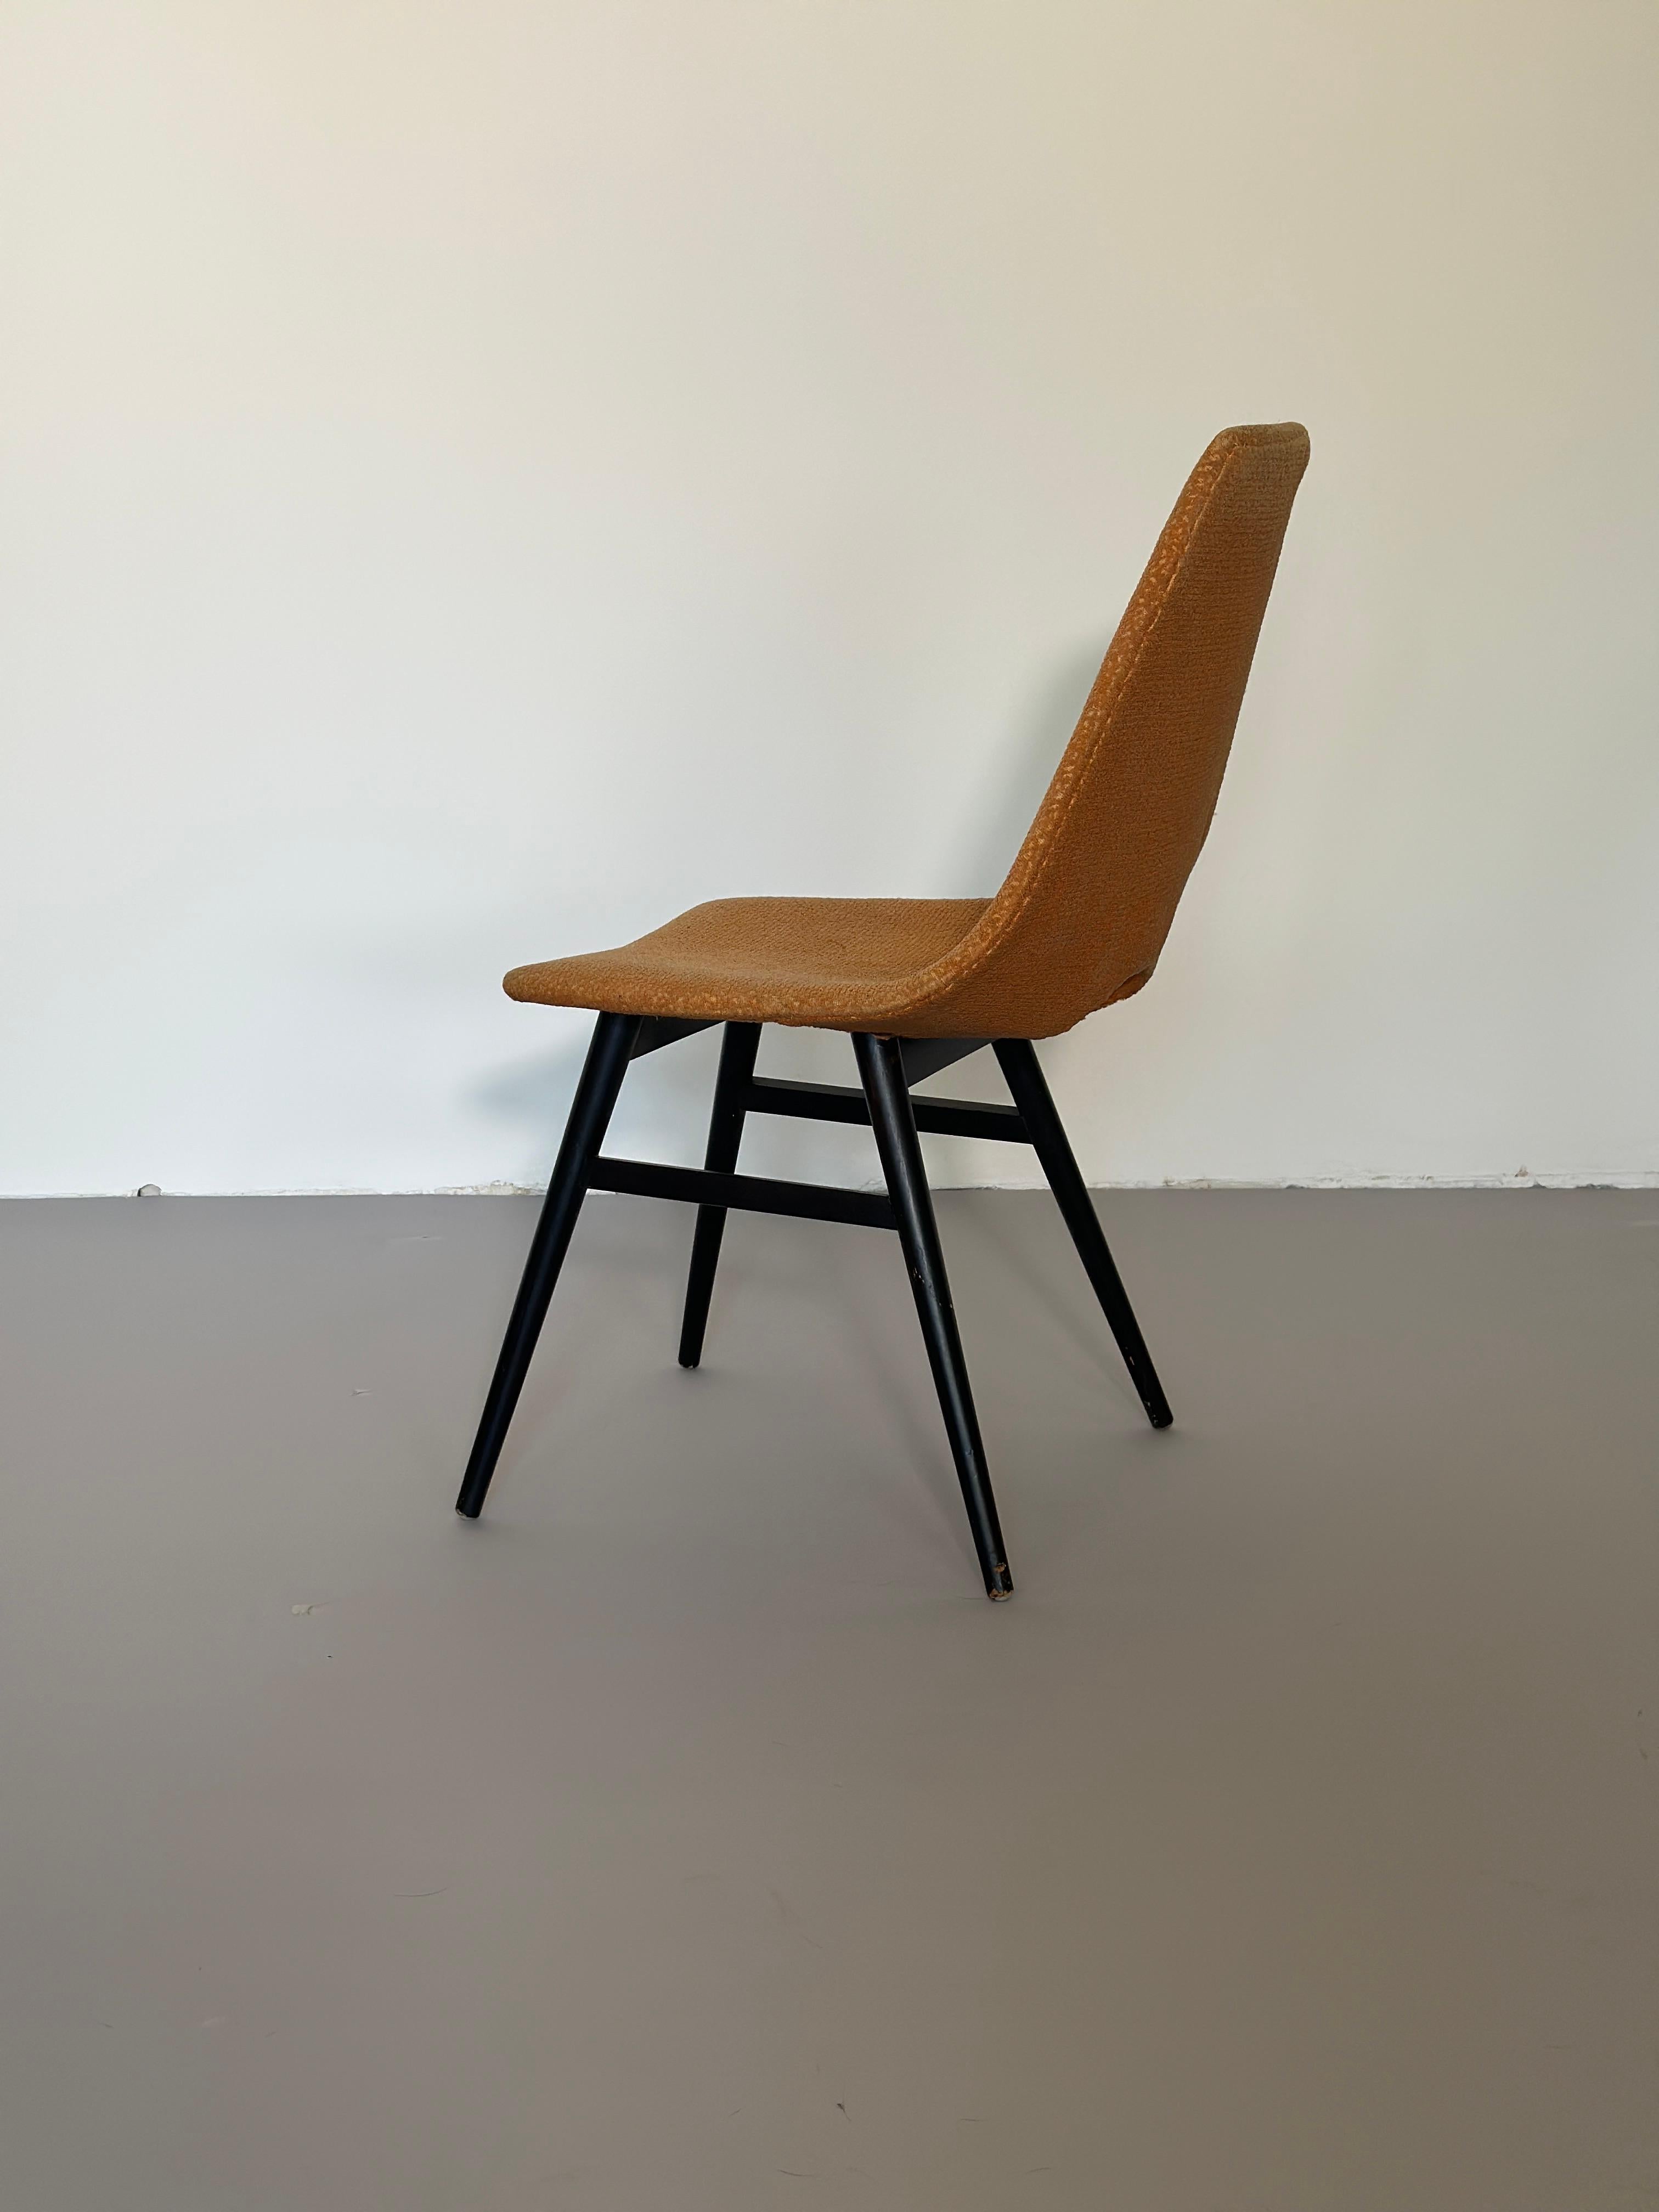 Mid-20th Century Chair By Judit Burian and Erika Szek 1950s For Sale